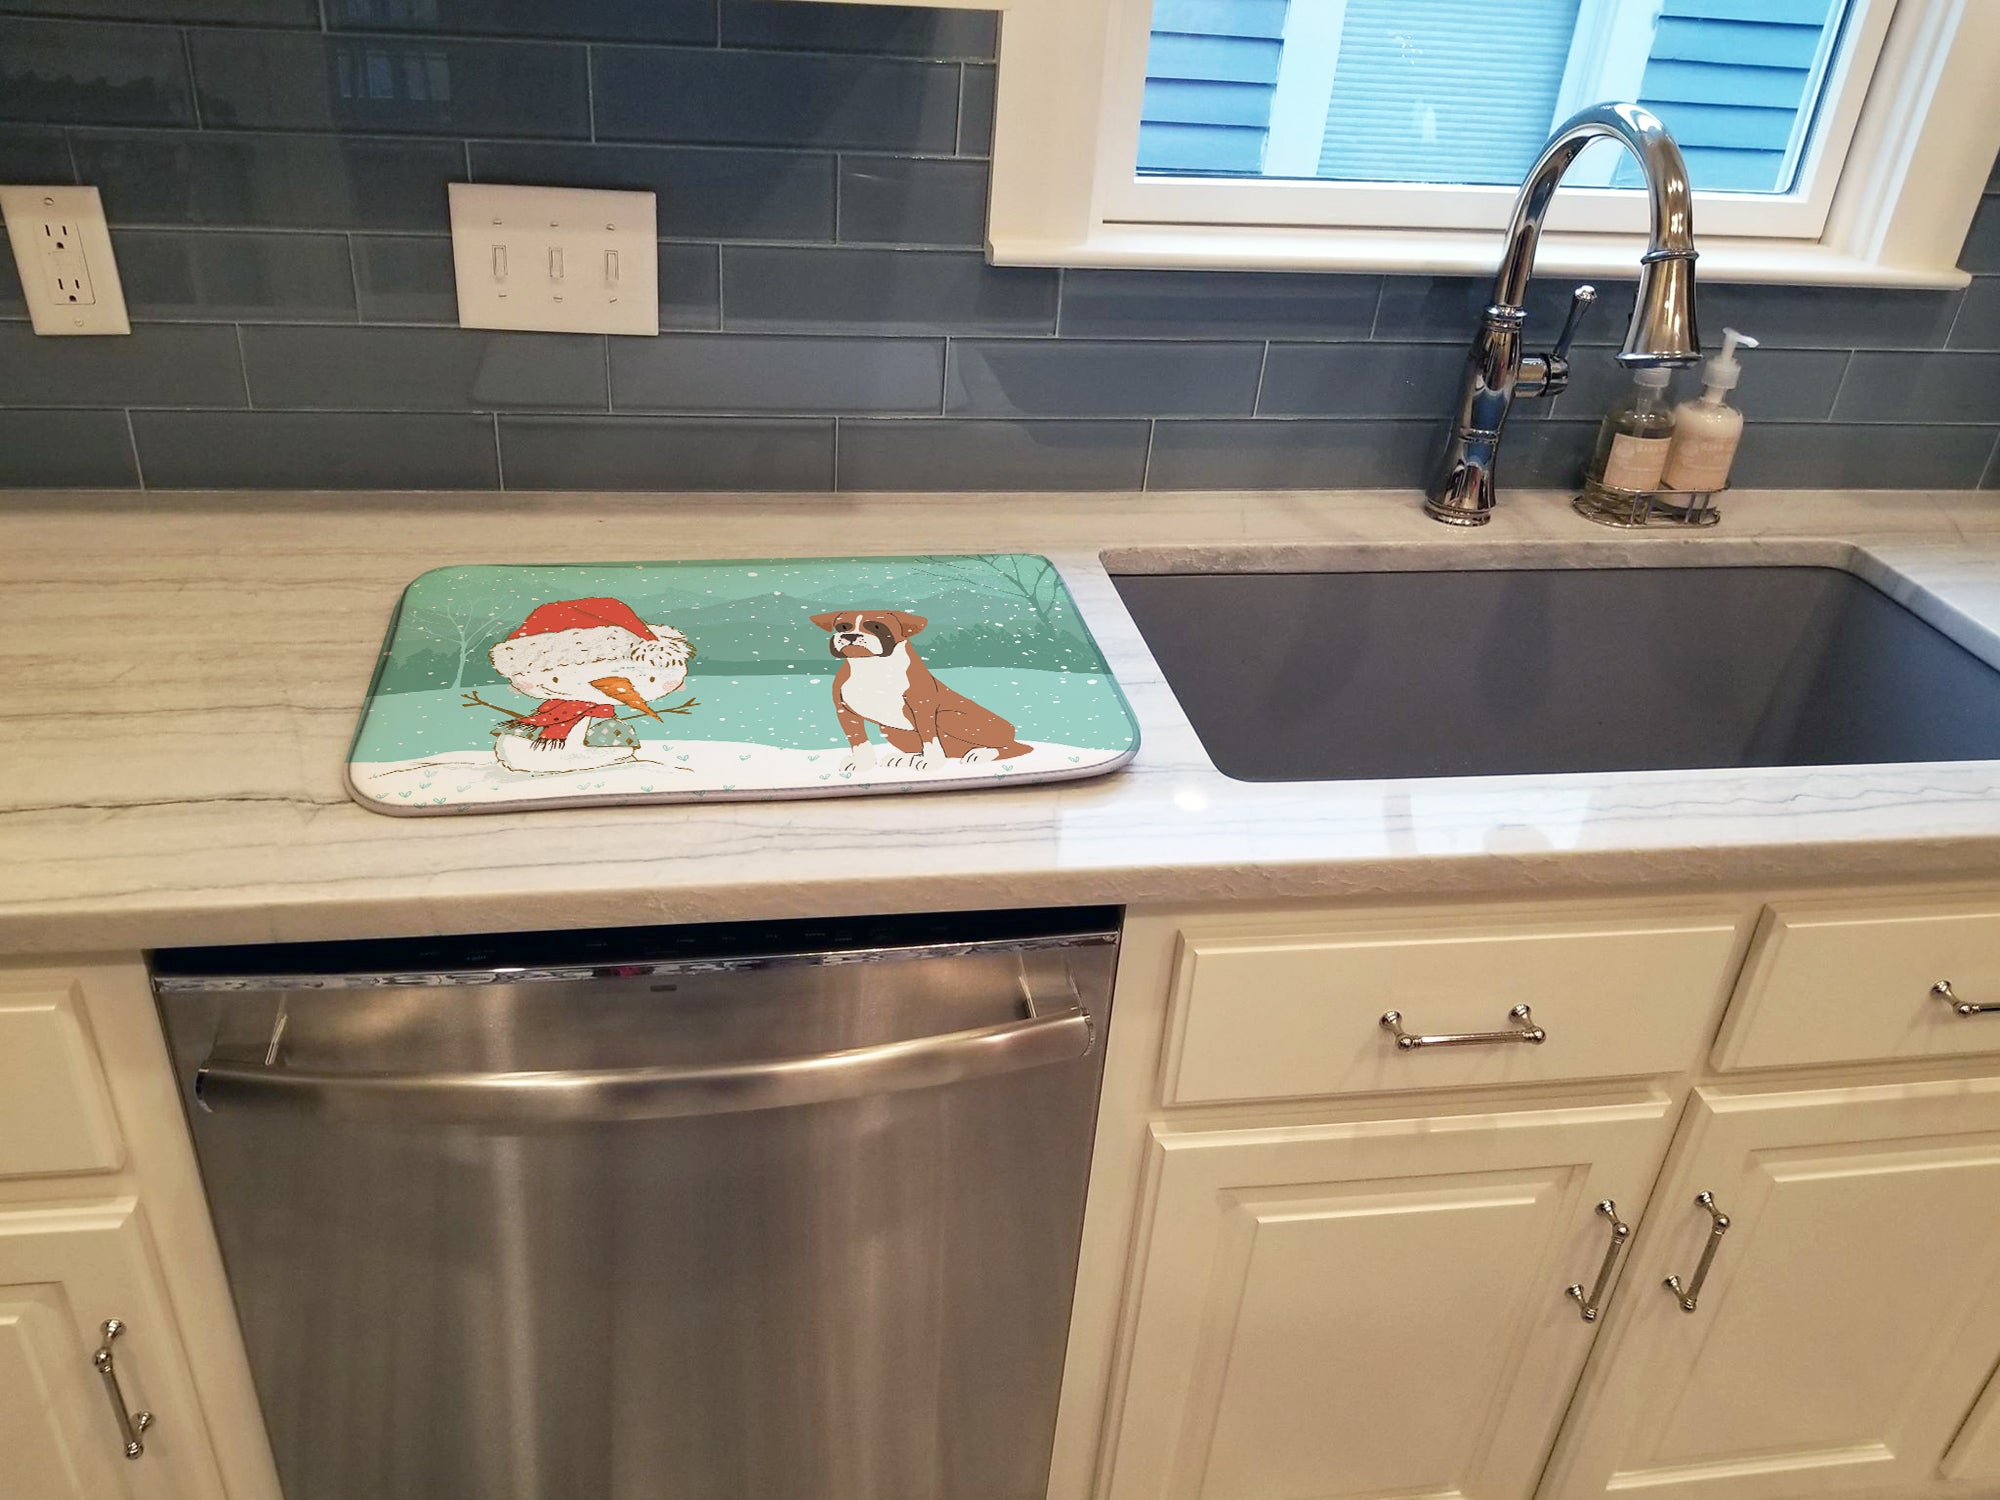 Fawn Boxer and Snowman Christmas Dish Drying Mat CK2036DDM  the-store.com.